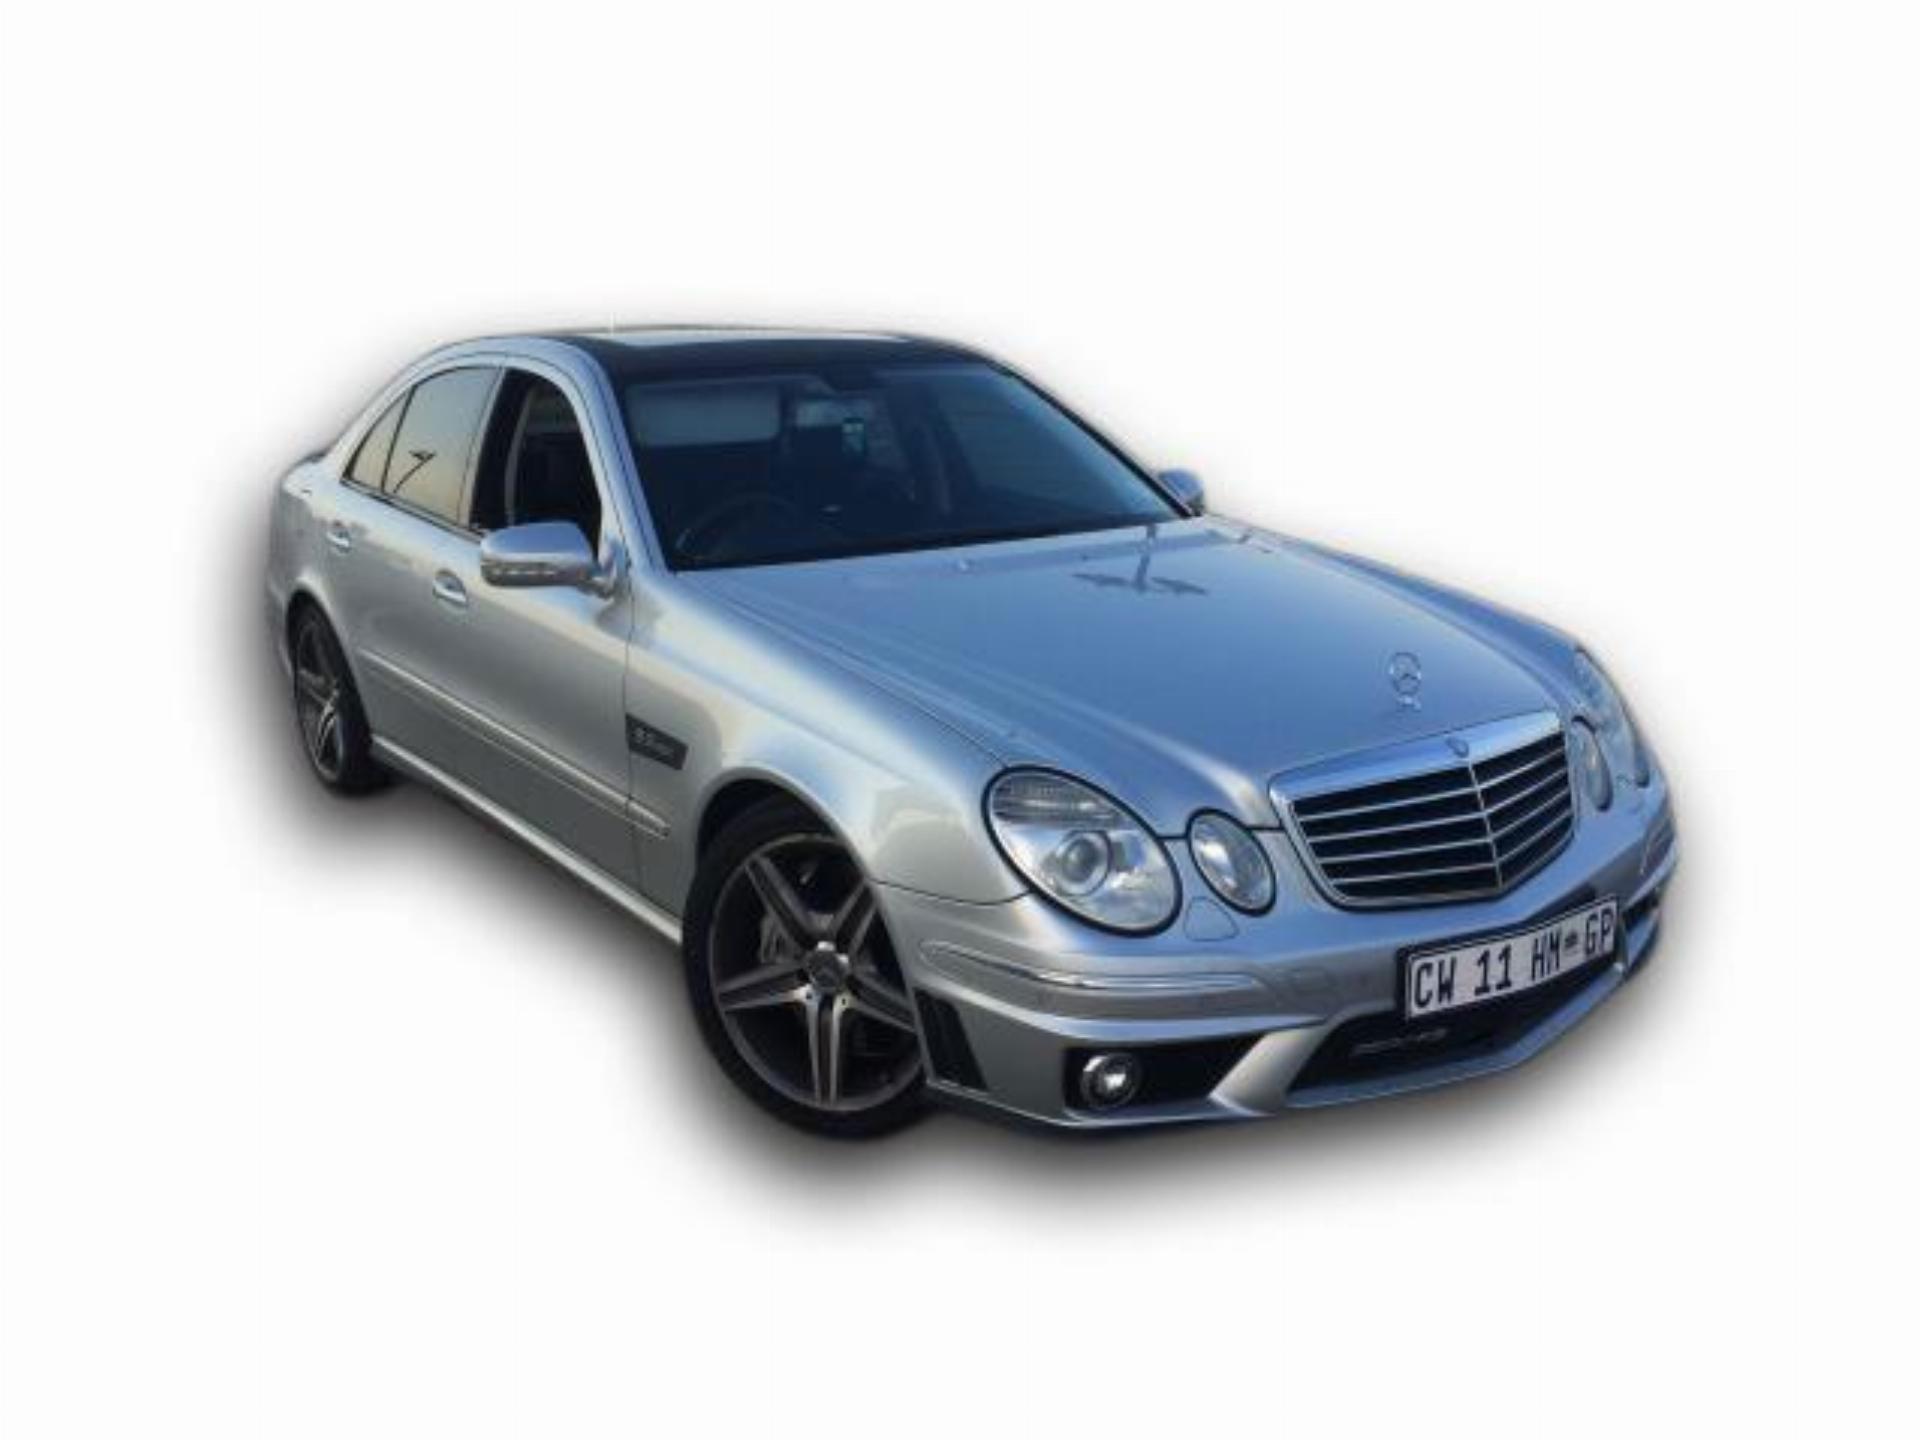 Used Mercedes Benz E Class E63 Amg 2007 on auction - PV1010105